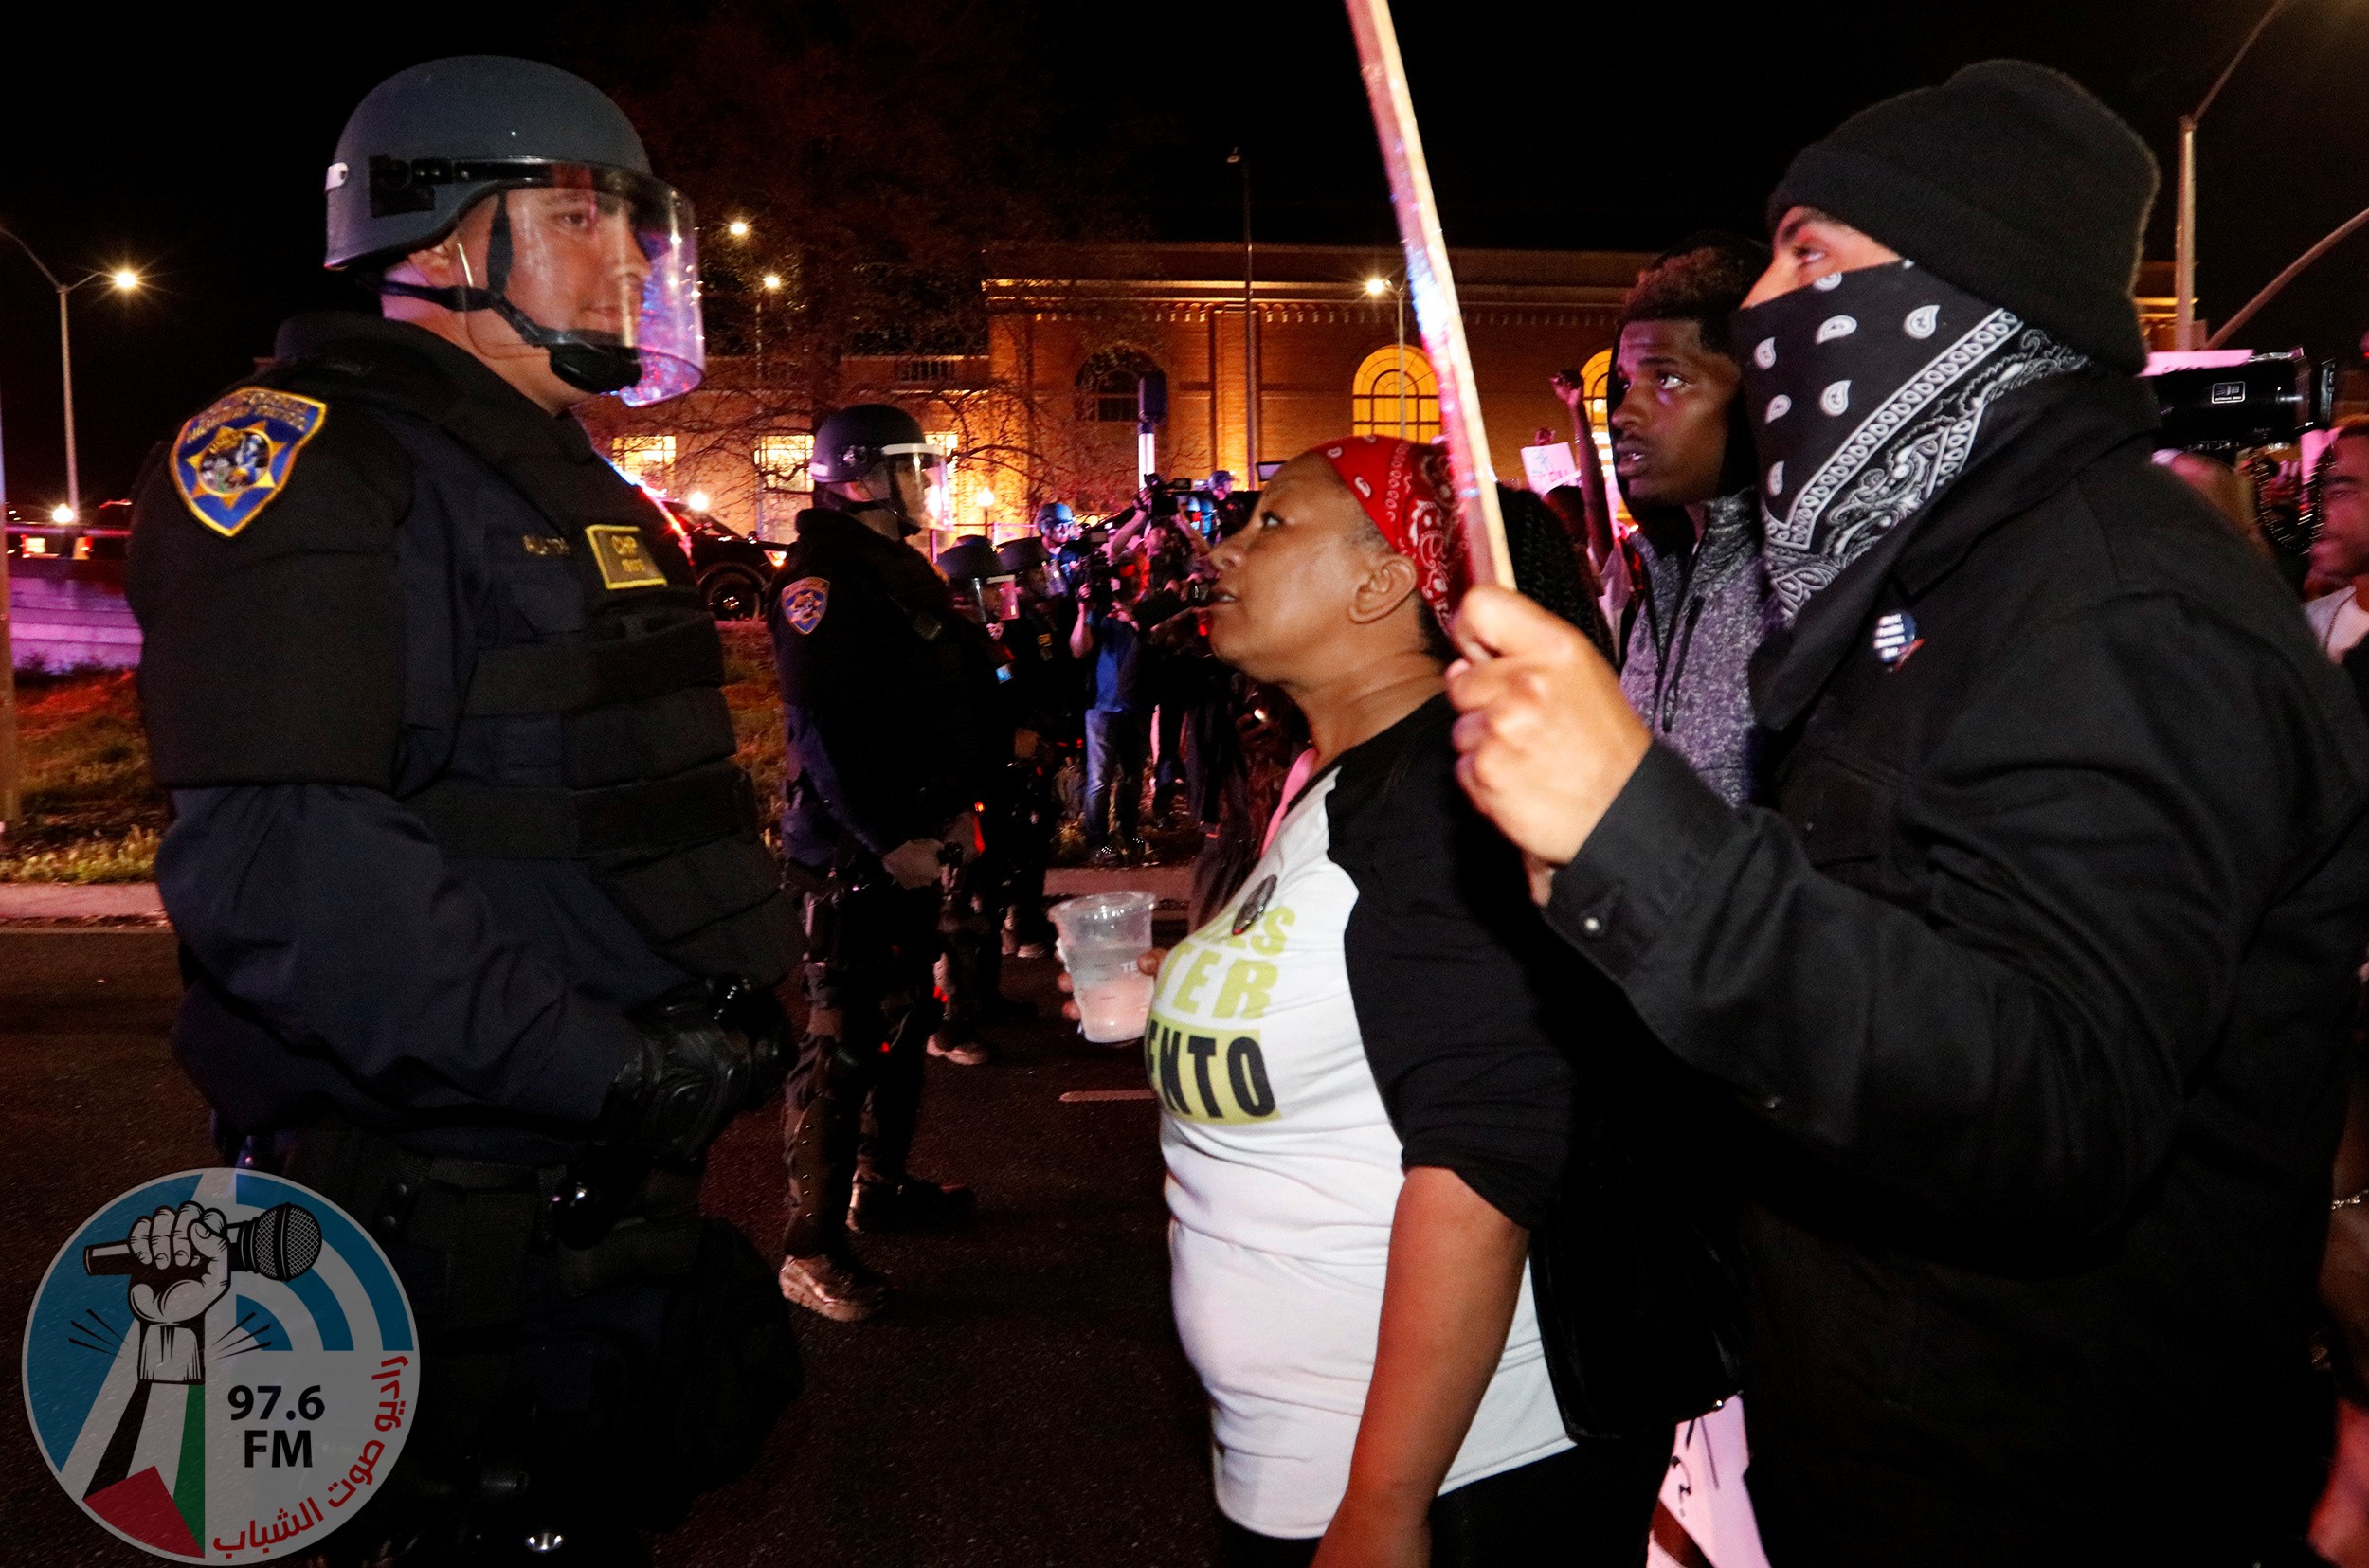 Demonstrators face off with California Highway Patrol officers as they protest the police shooting of Stephon Clark, in Sacramento, California, U.S., March 30, 2018. REUTERS/Bob Strong